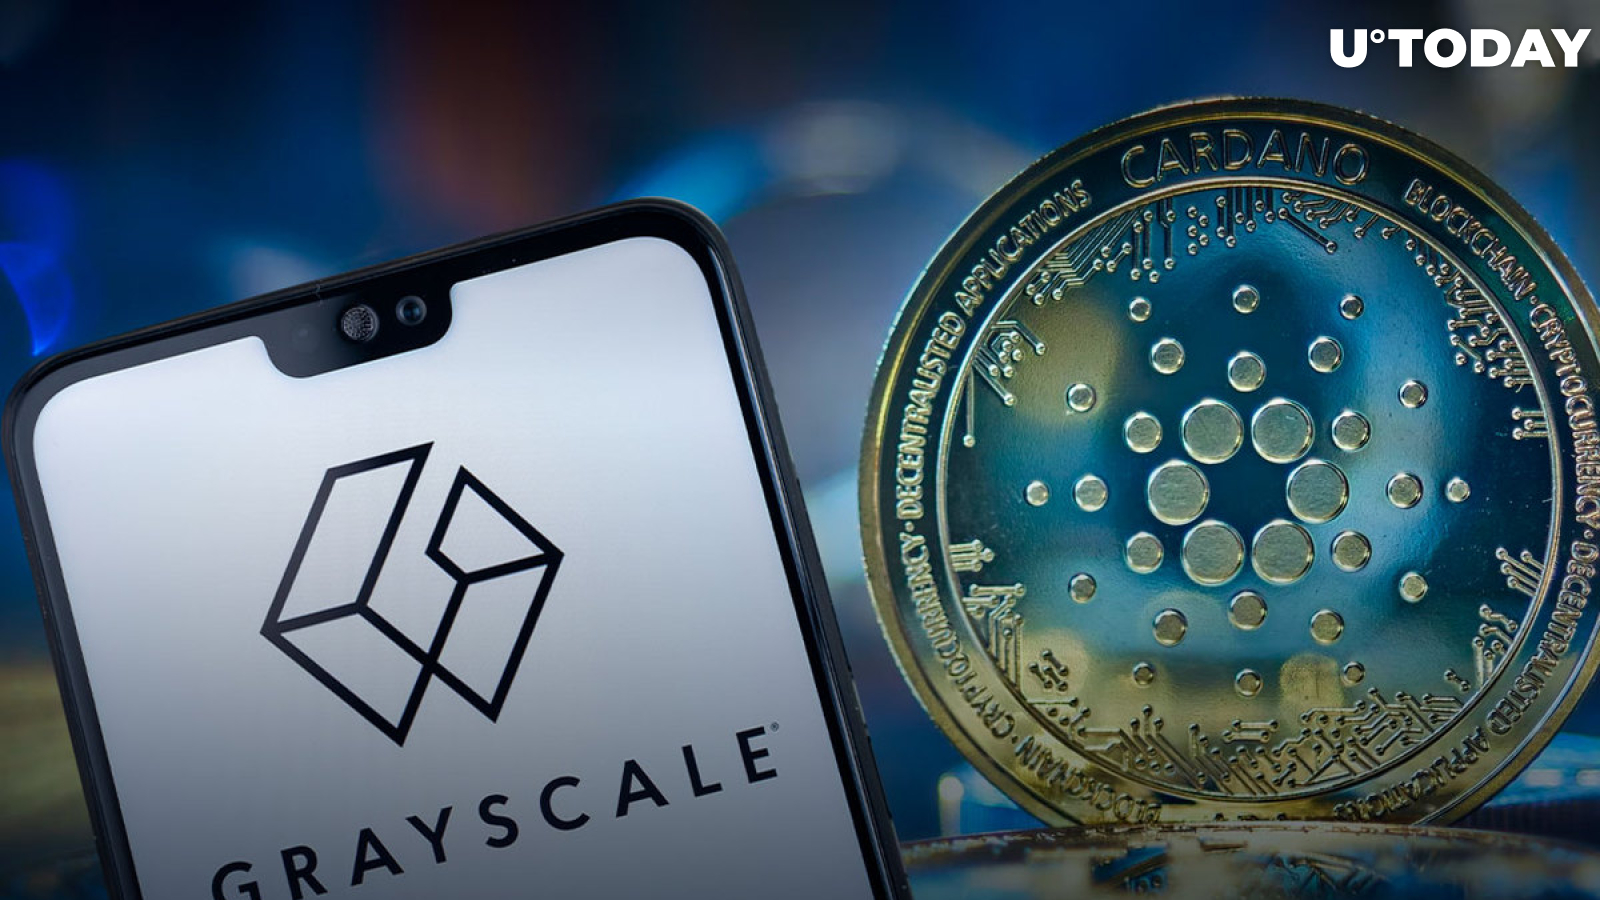 Grayscale Removes BCH, LTC and LINK from Large-Cap Fund; Cardano Retains Weighting